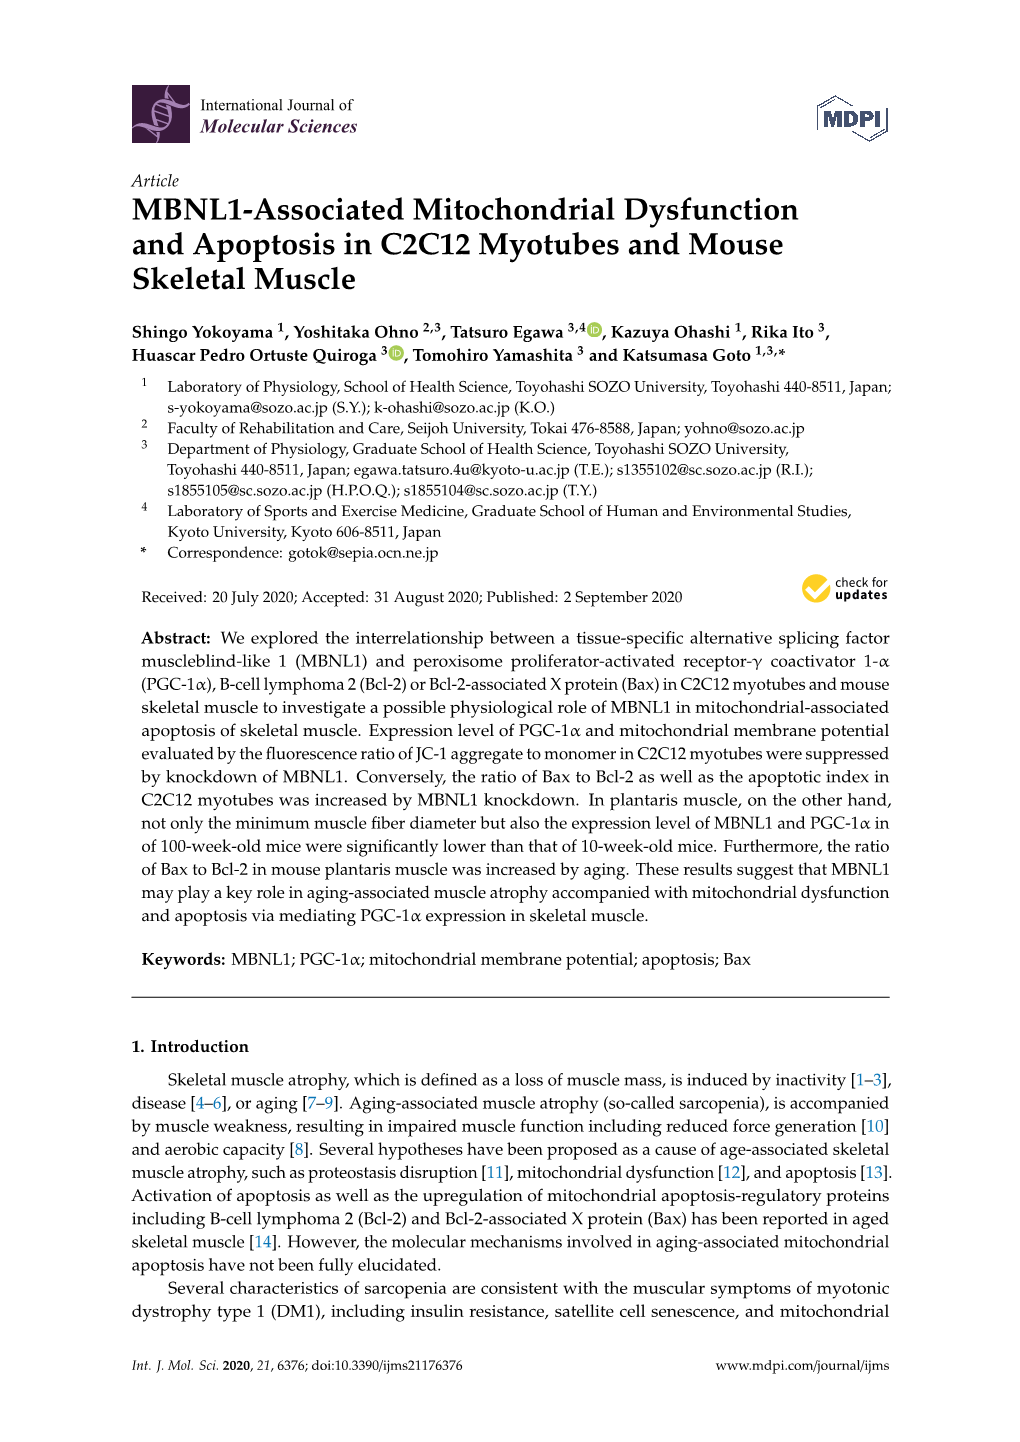 MBNL1-Associated Mitochondrial Dysfunction and Apoptosis in C2C12 Myotubes and Mouse Skeletal Muscle